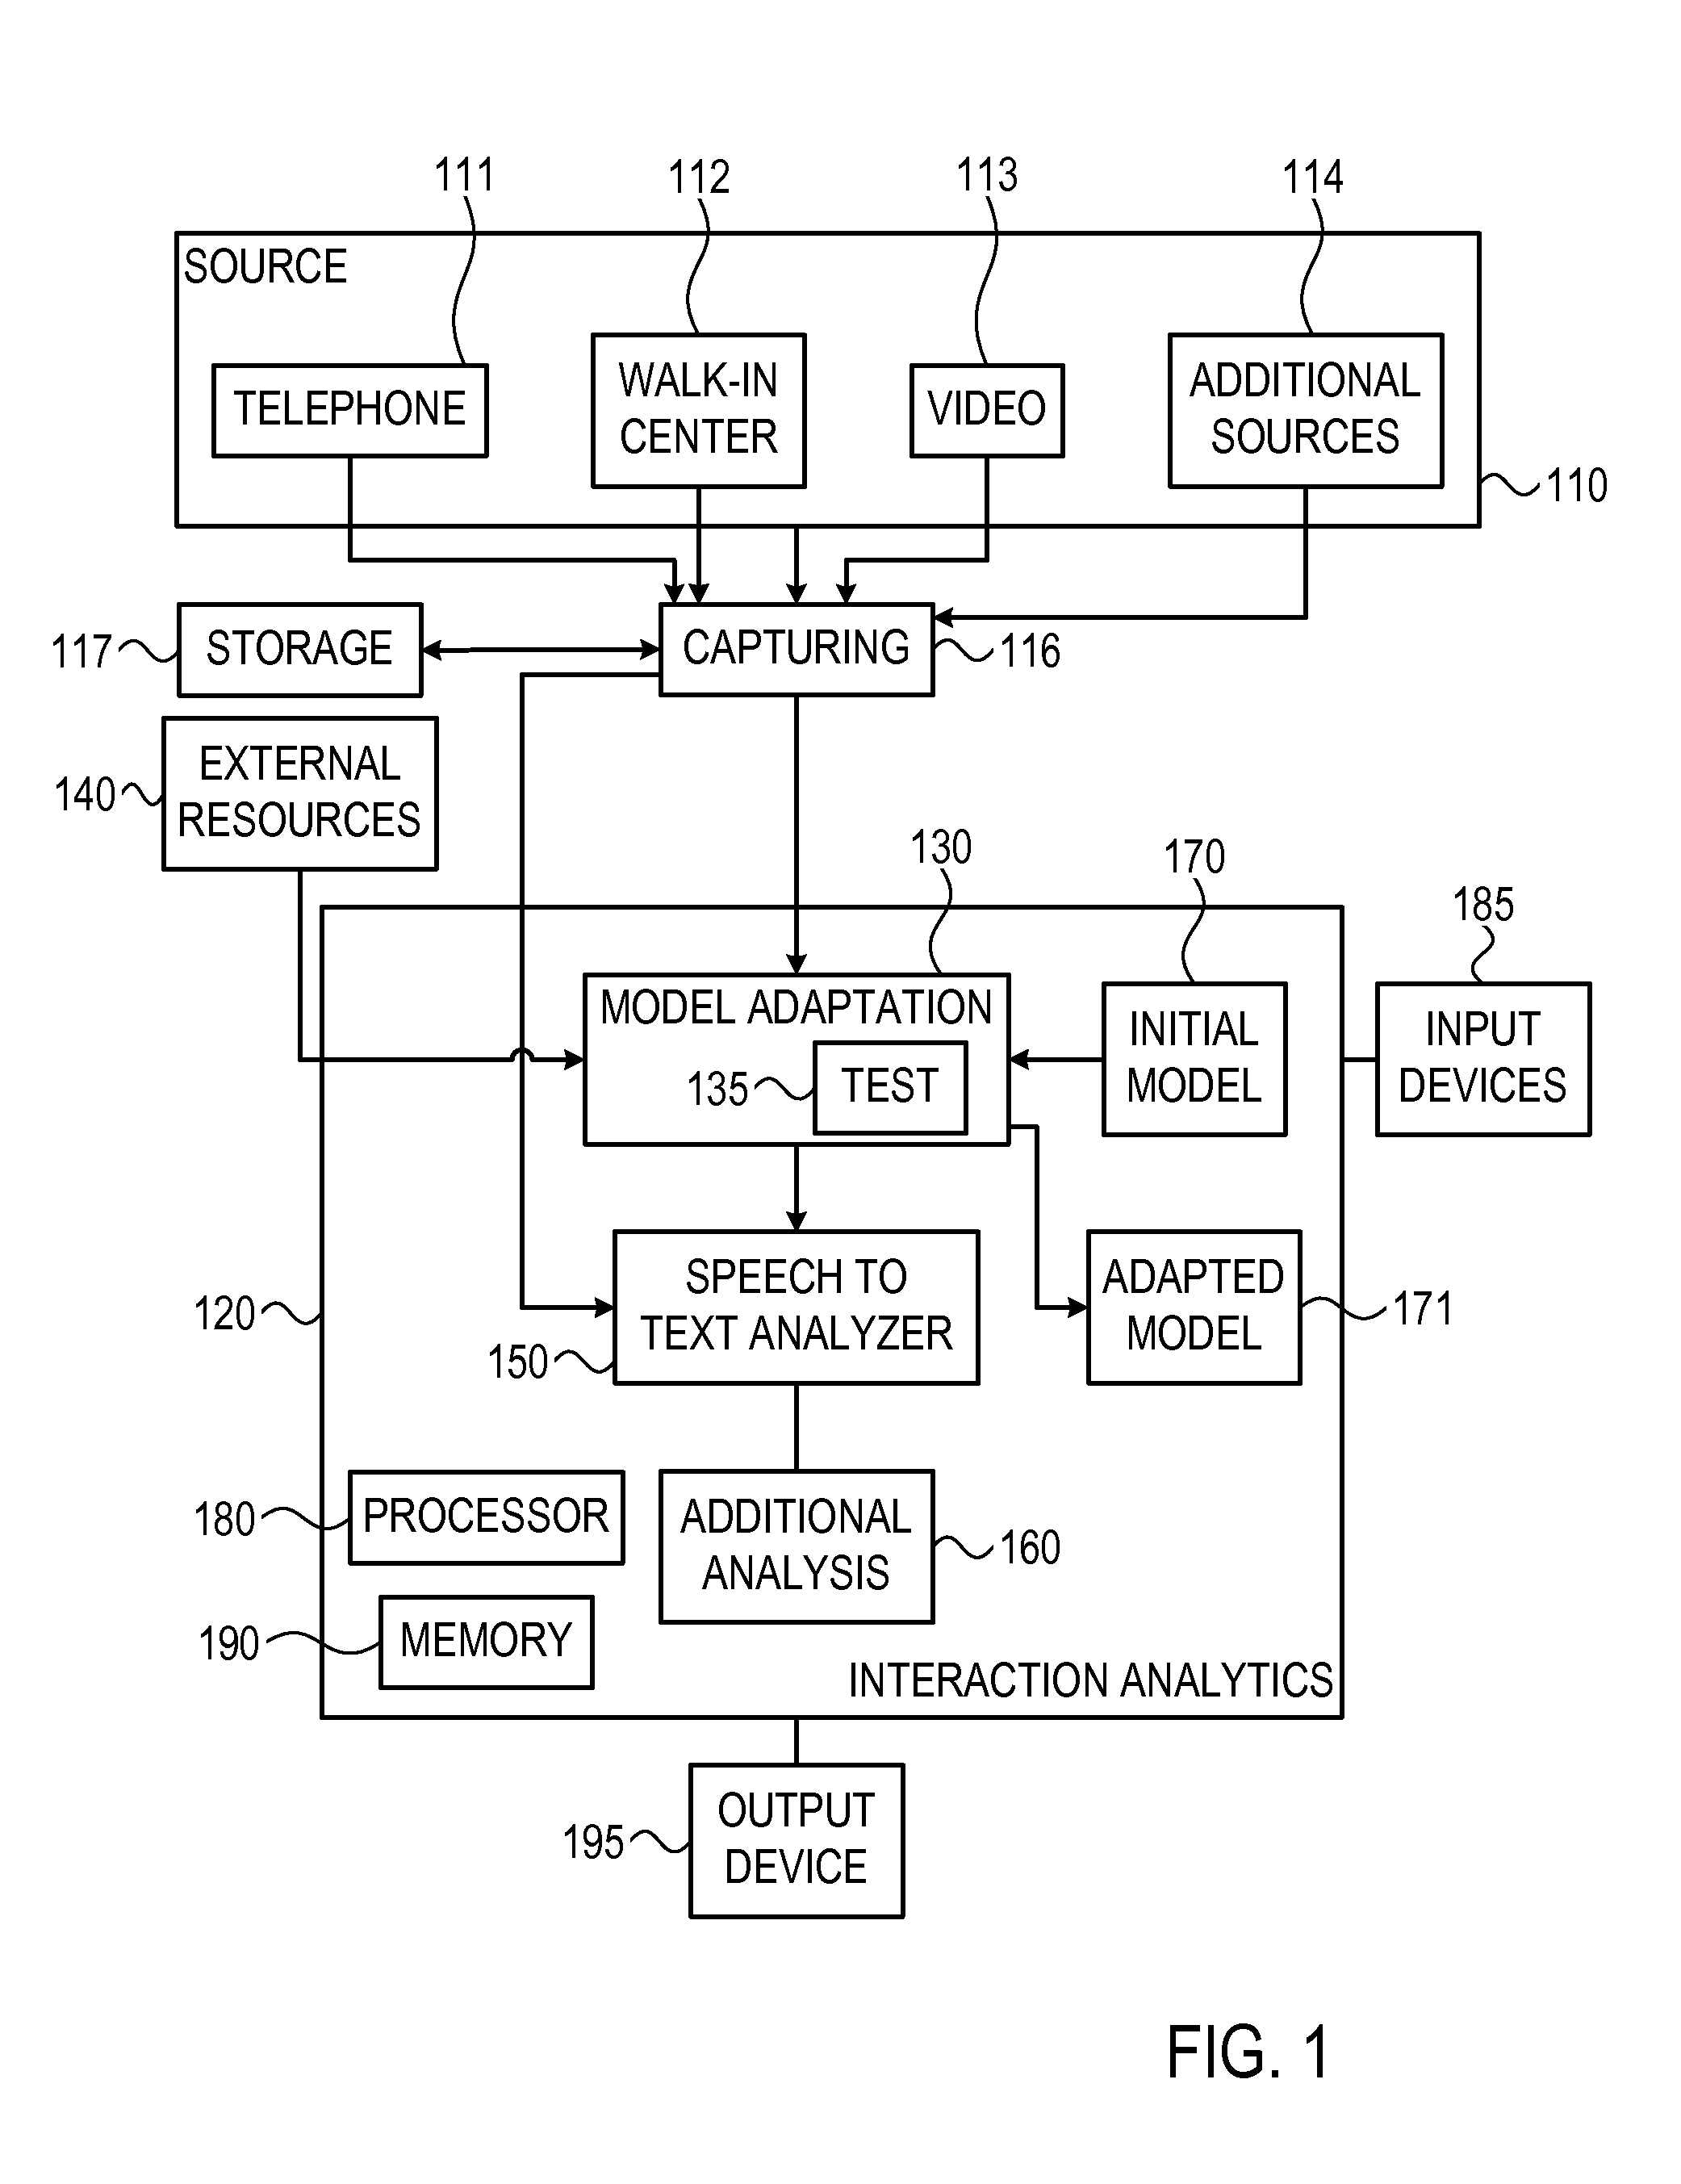 Method and system for automatic domain adaptation in speech recognition applications